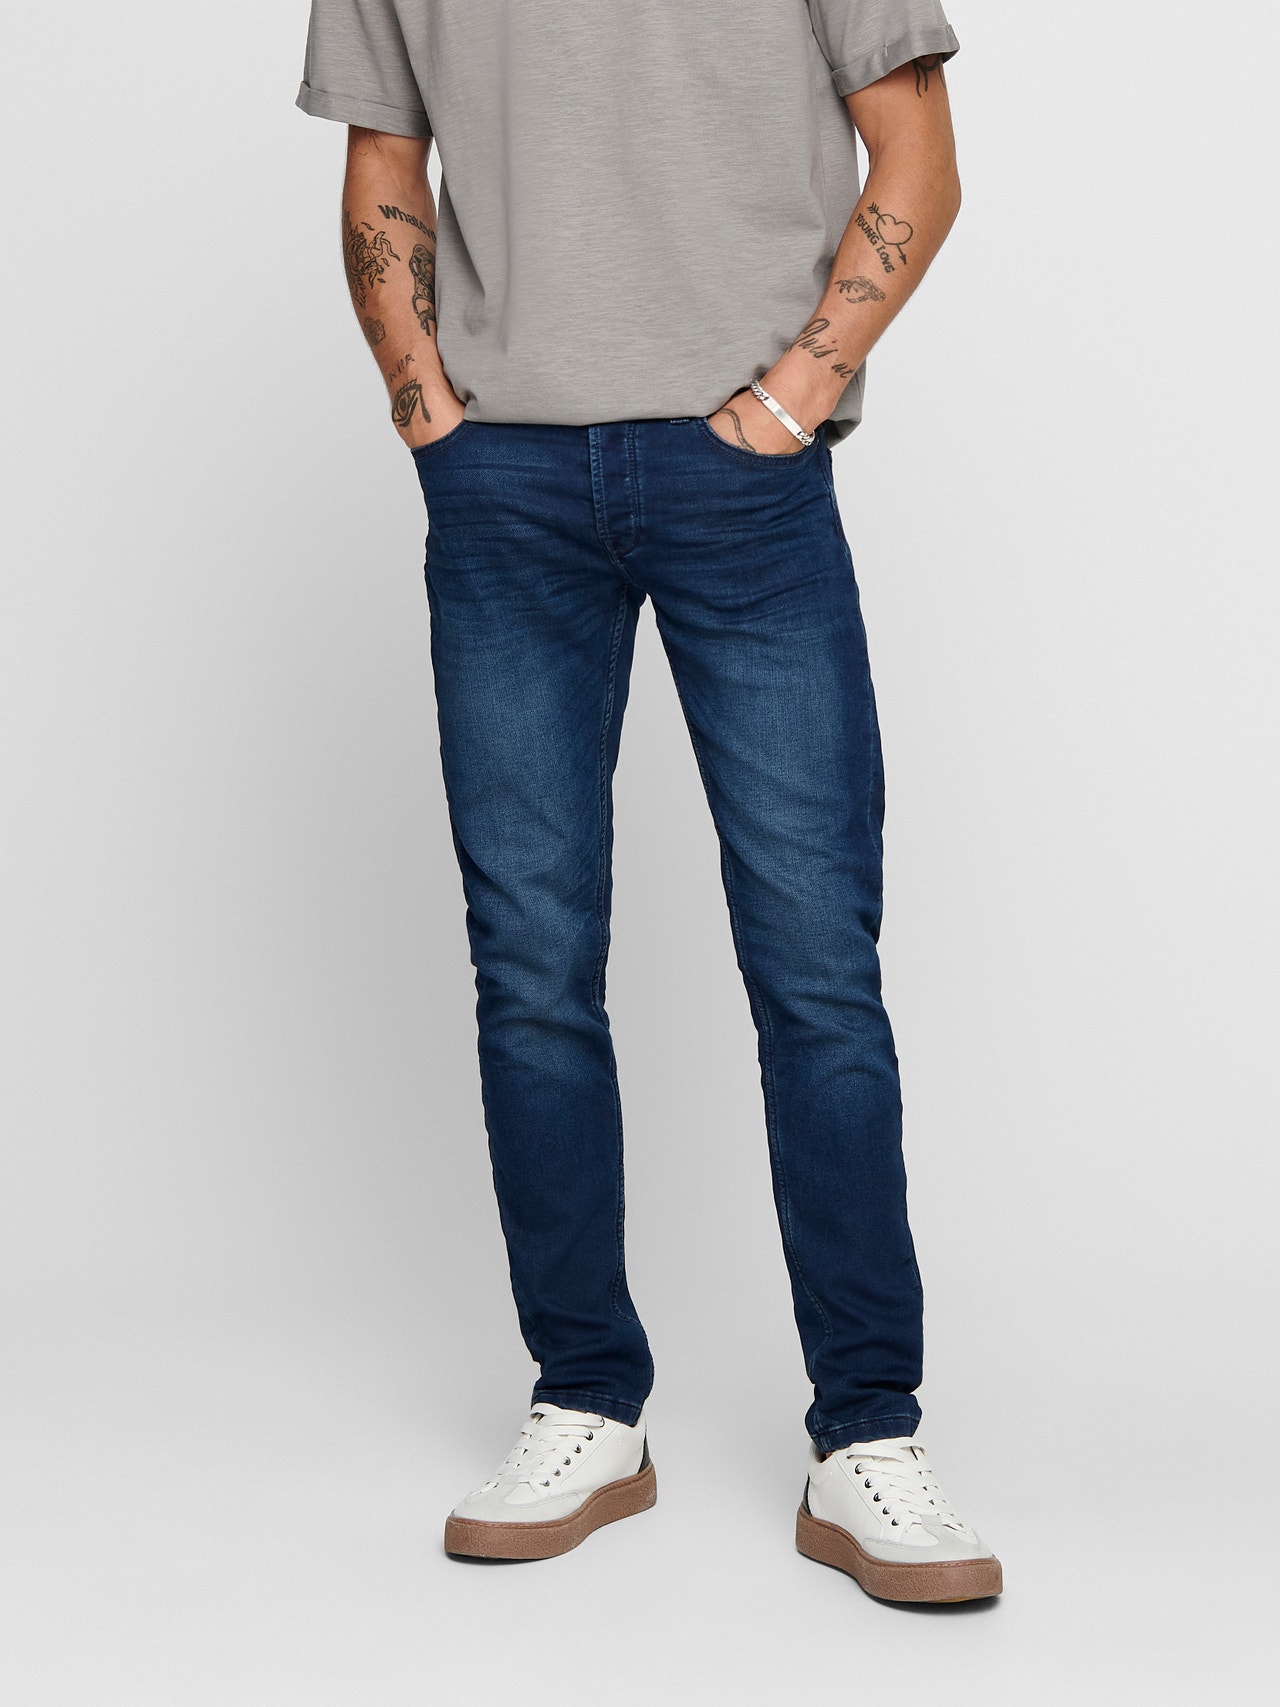 Slim Fit Regular rise | | ONLY & SONS®